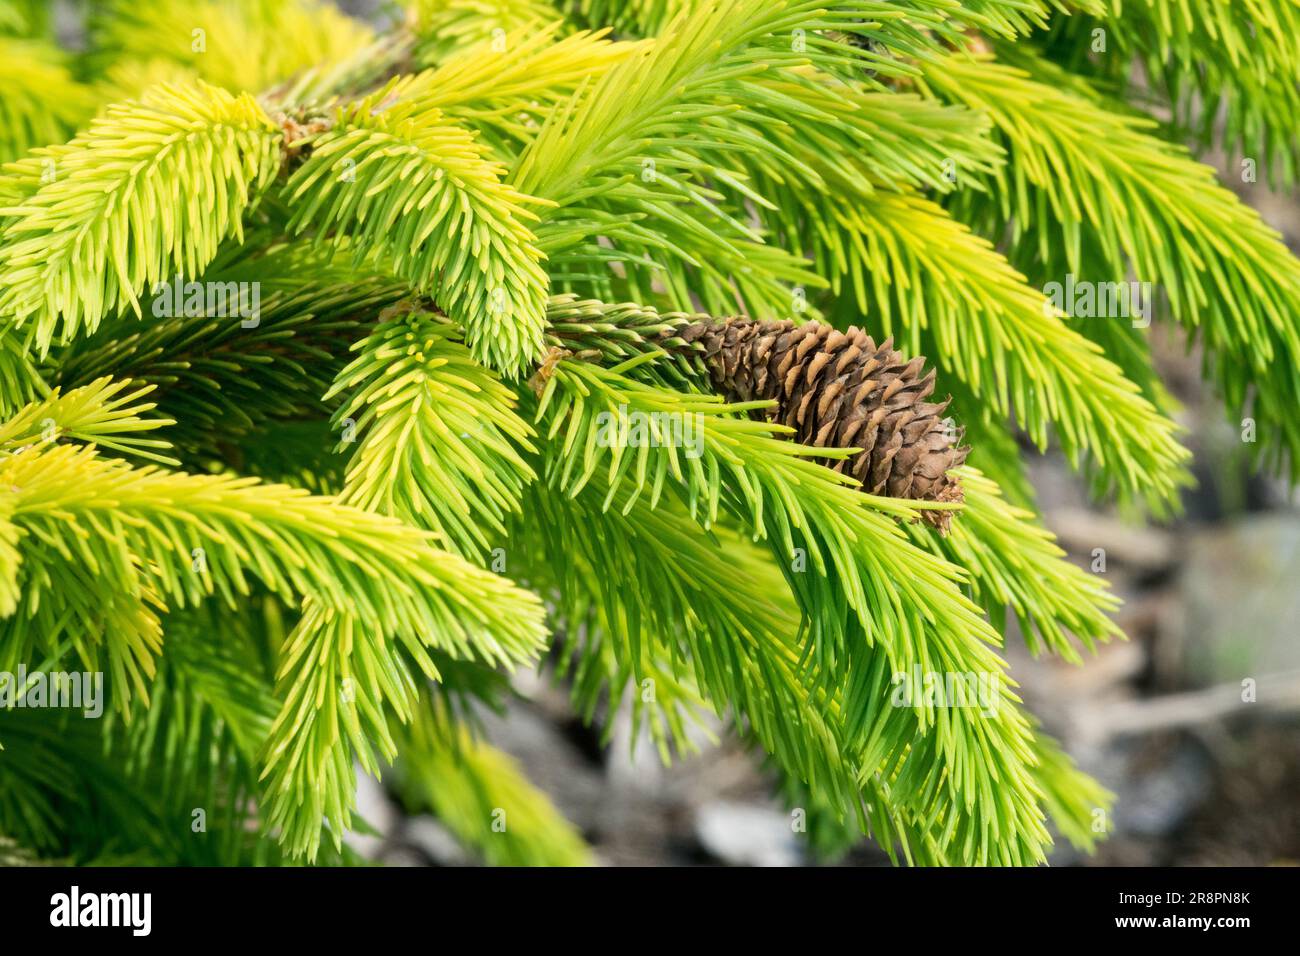 Norway spruce, Picea abies, Golden Yellow, Needles, Picea abies 'Catharines Golden Heart' Cone Stock Photo